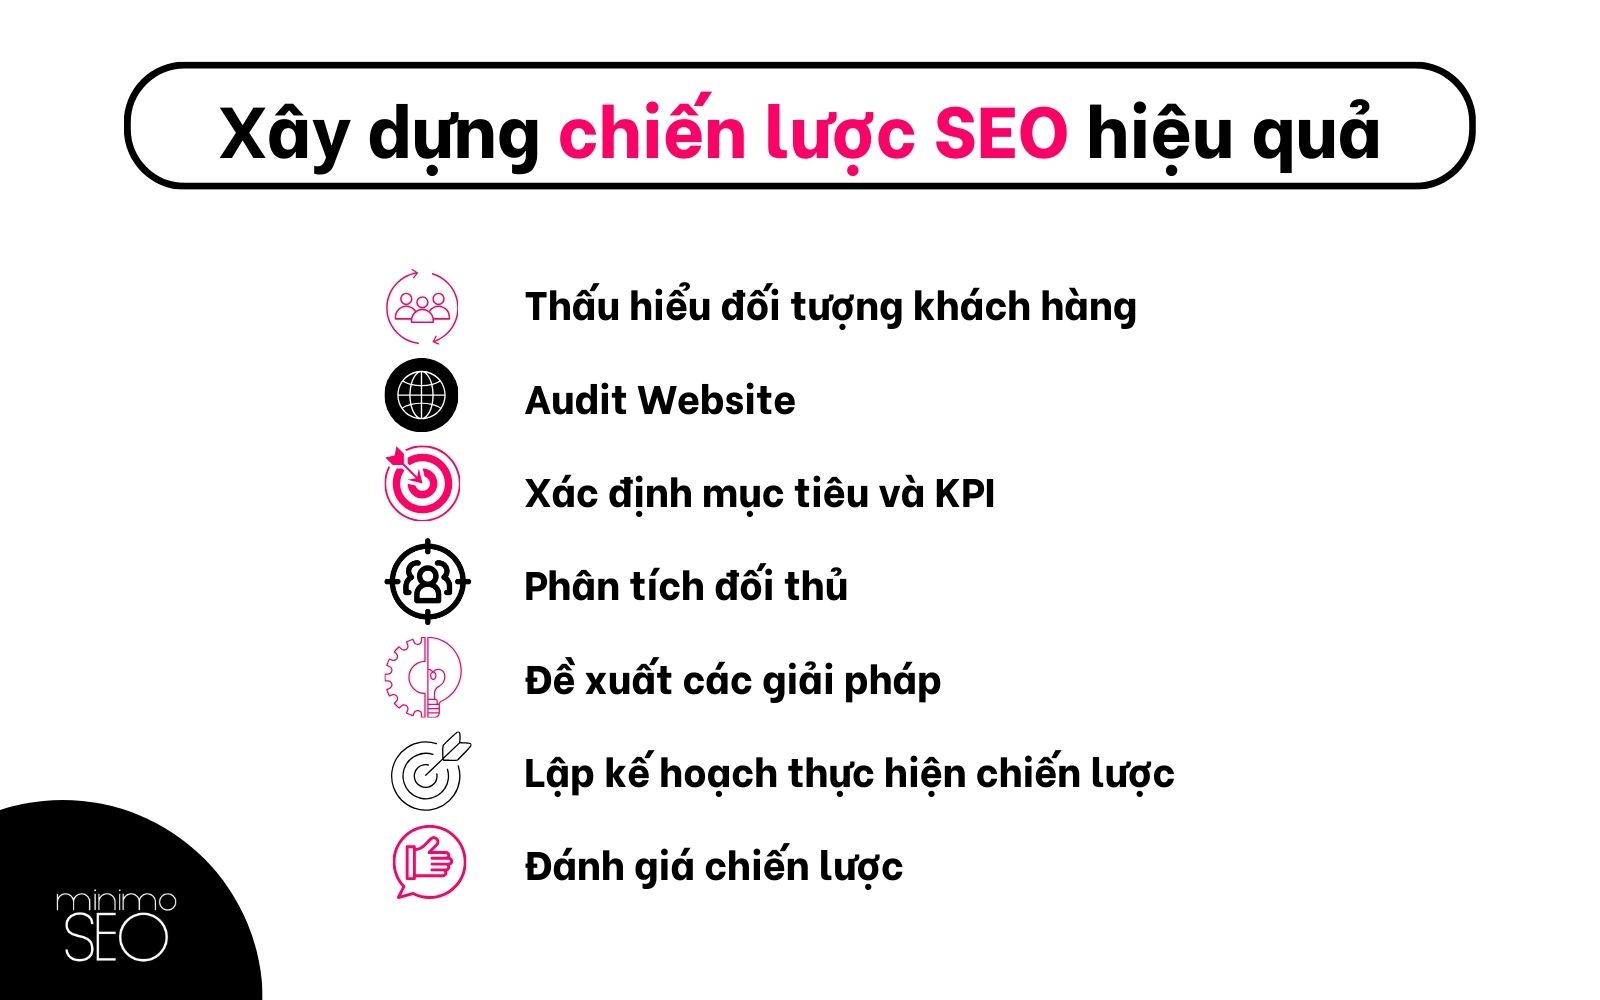 -xay-dung-chien-luoc